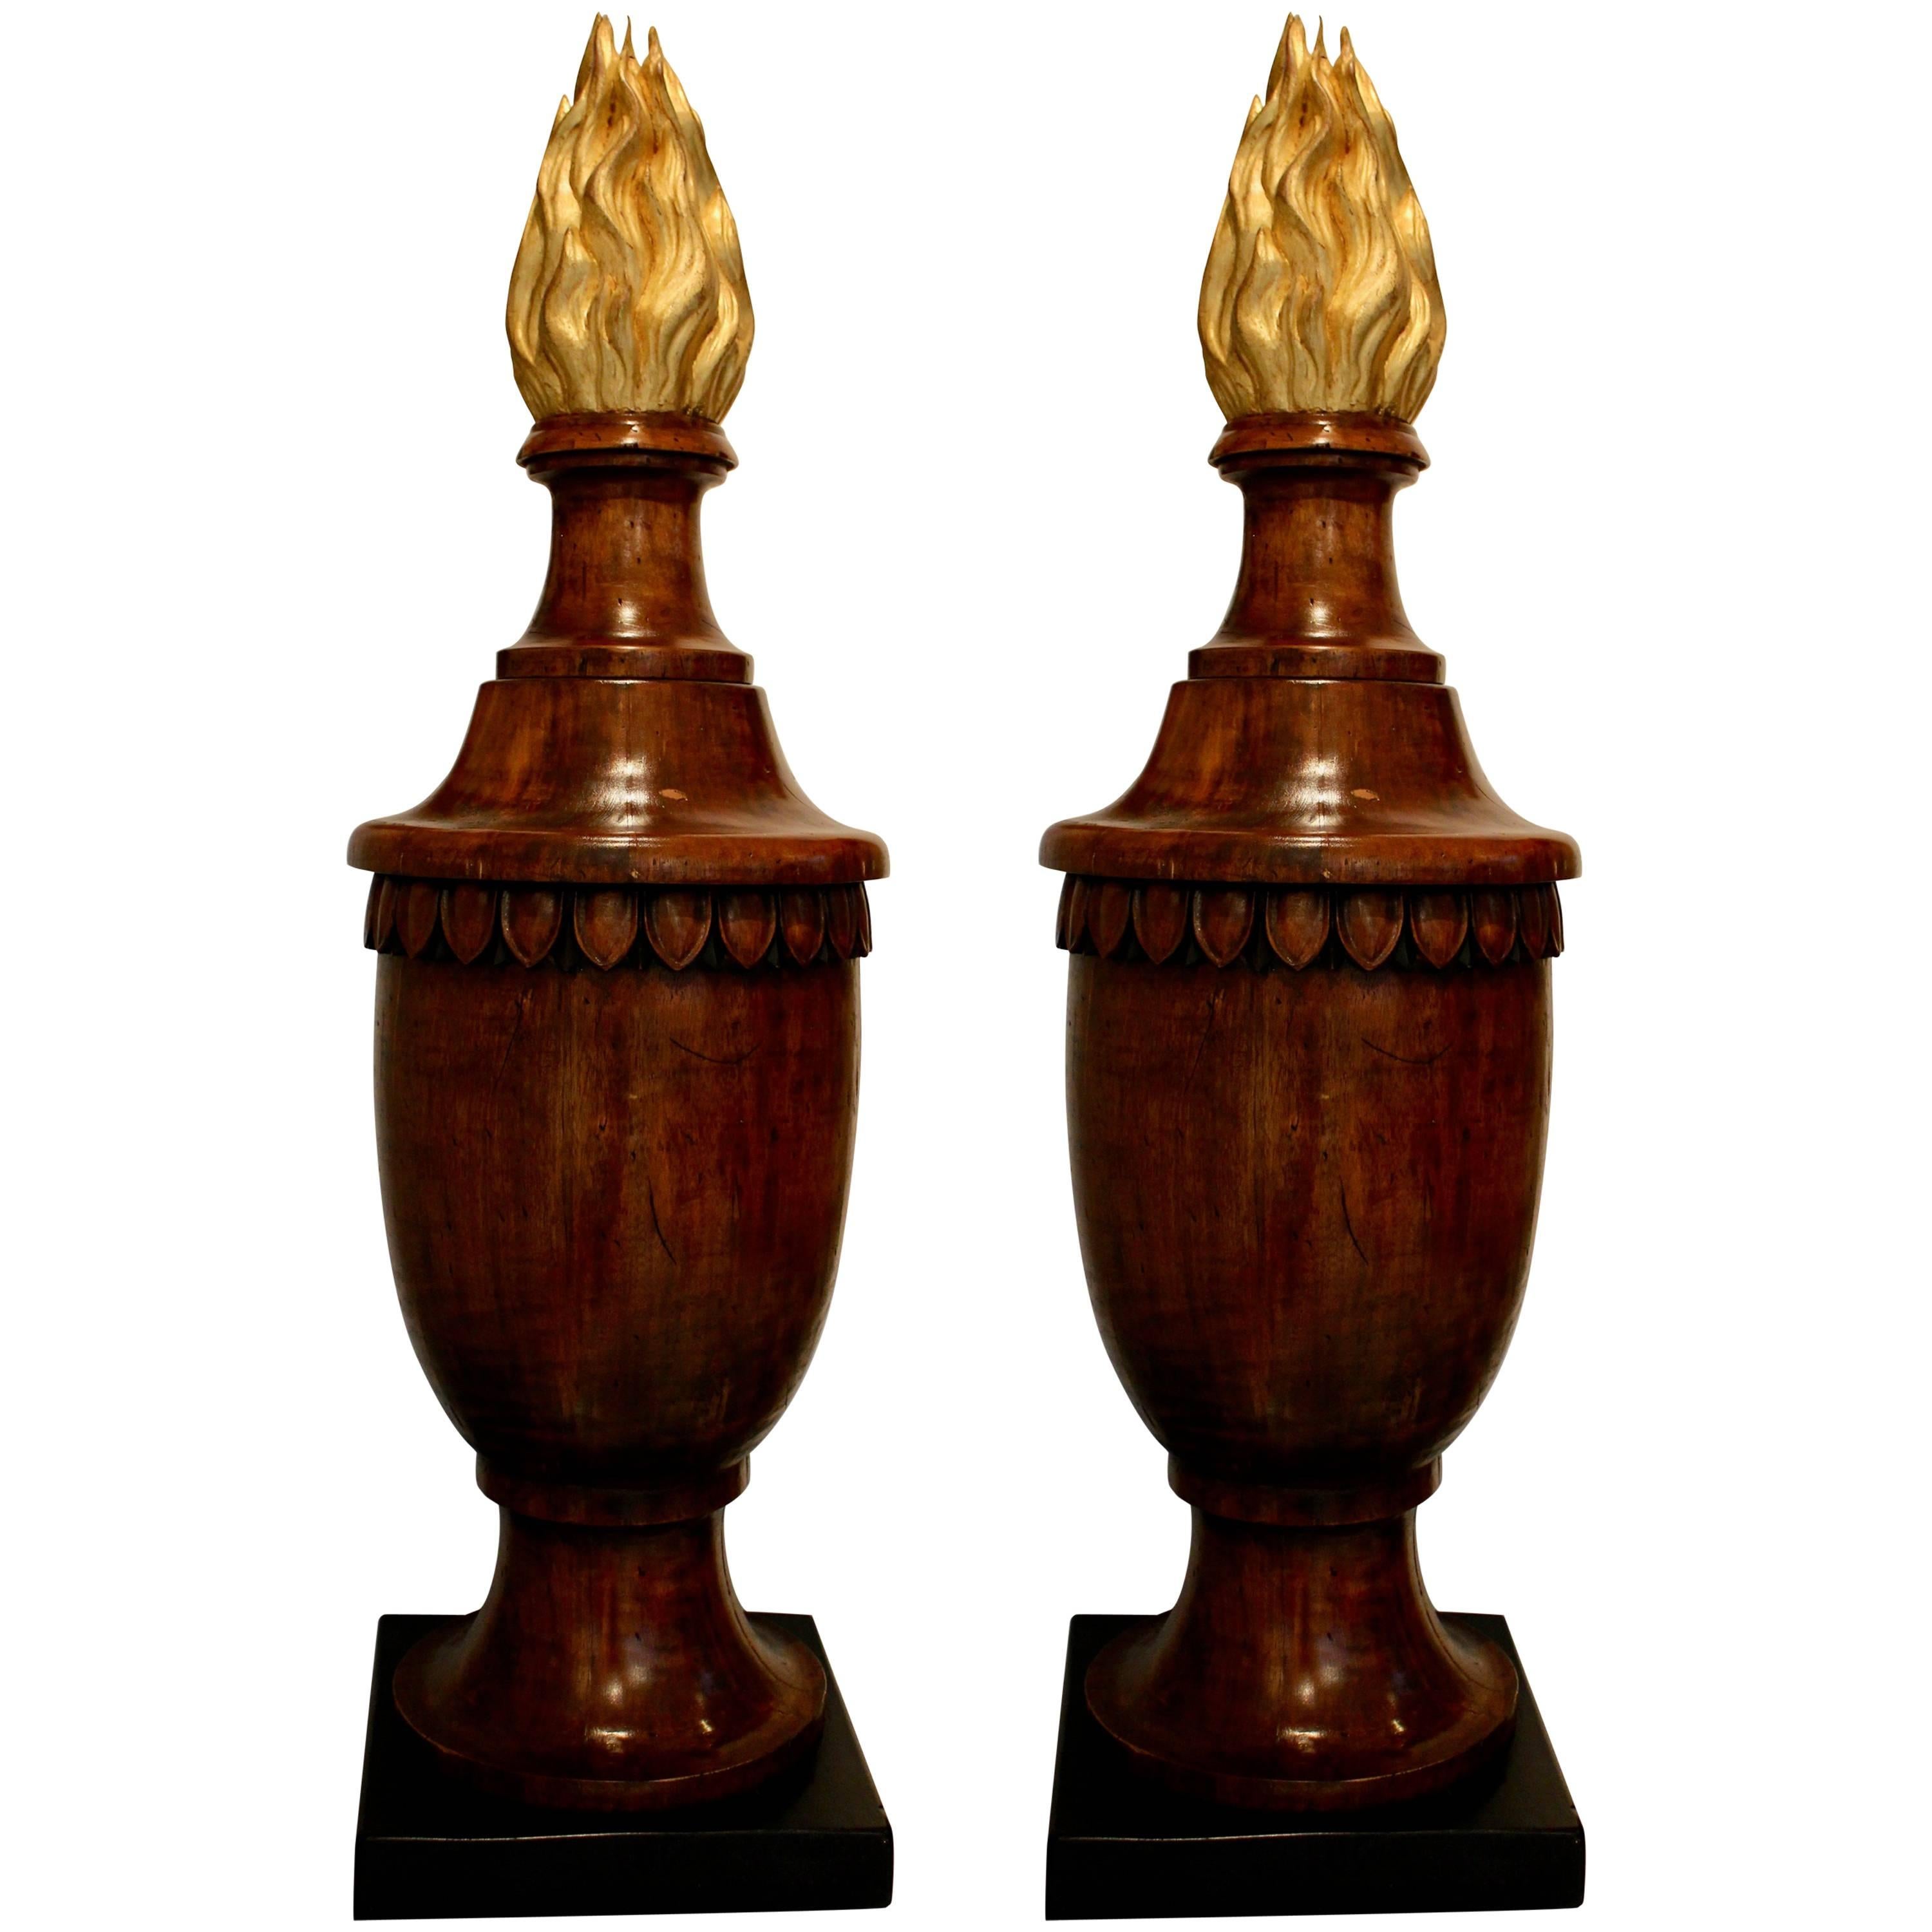 Pair of Neoclassical Style Wood Finials in the Form of Urns For Sale